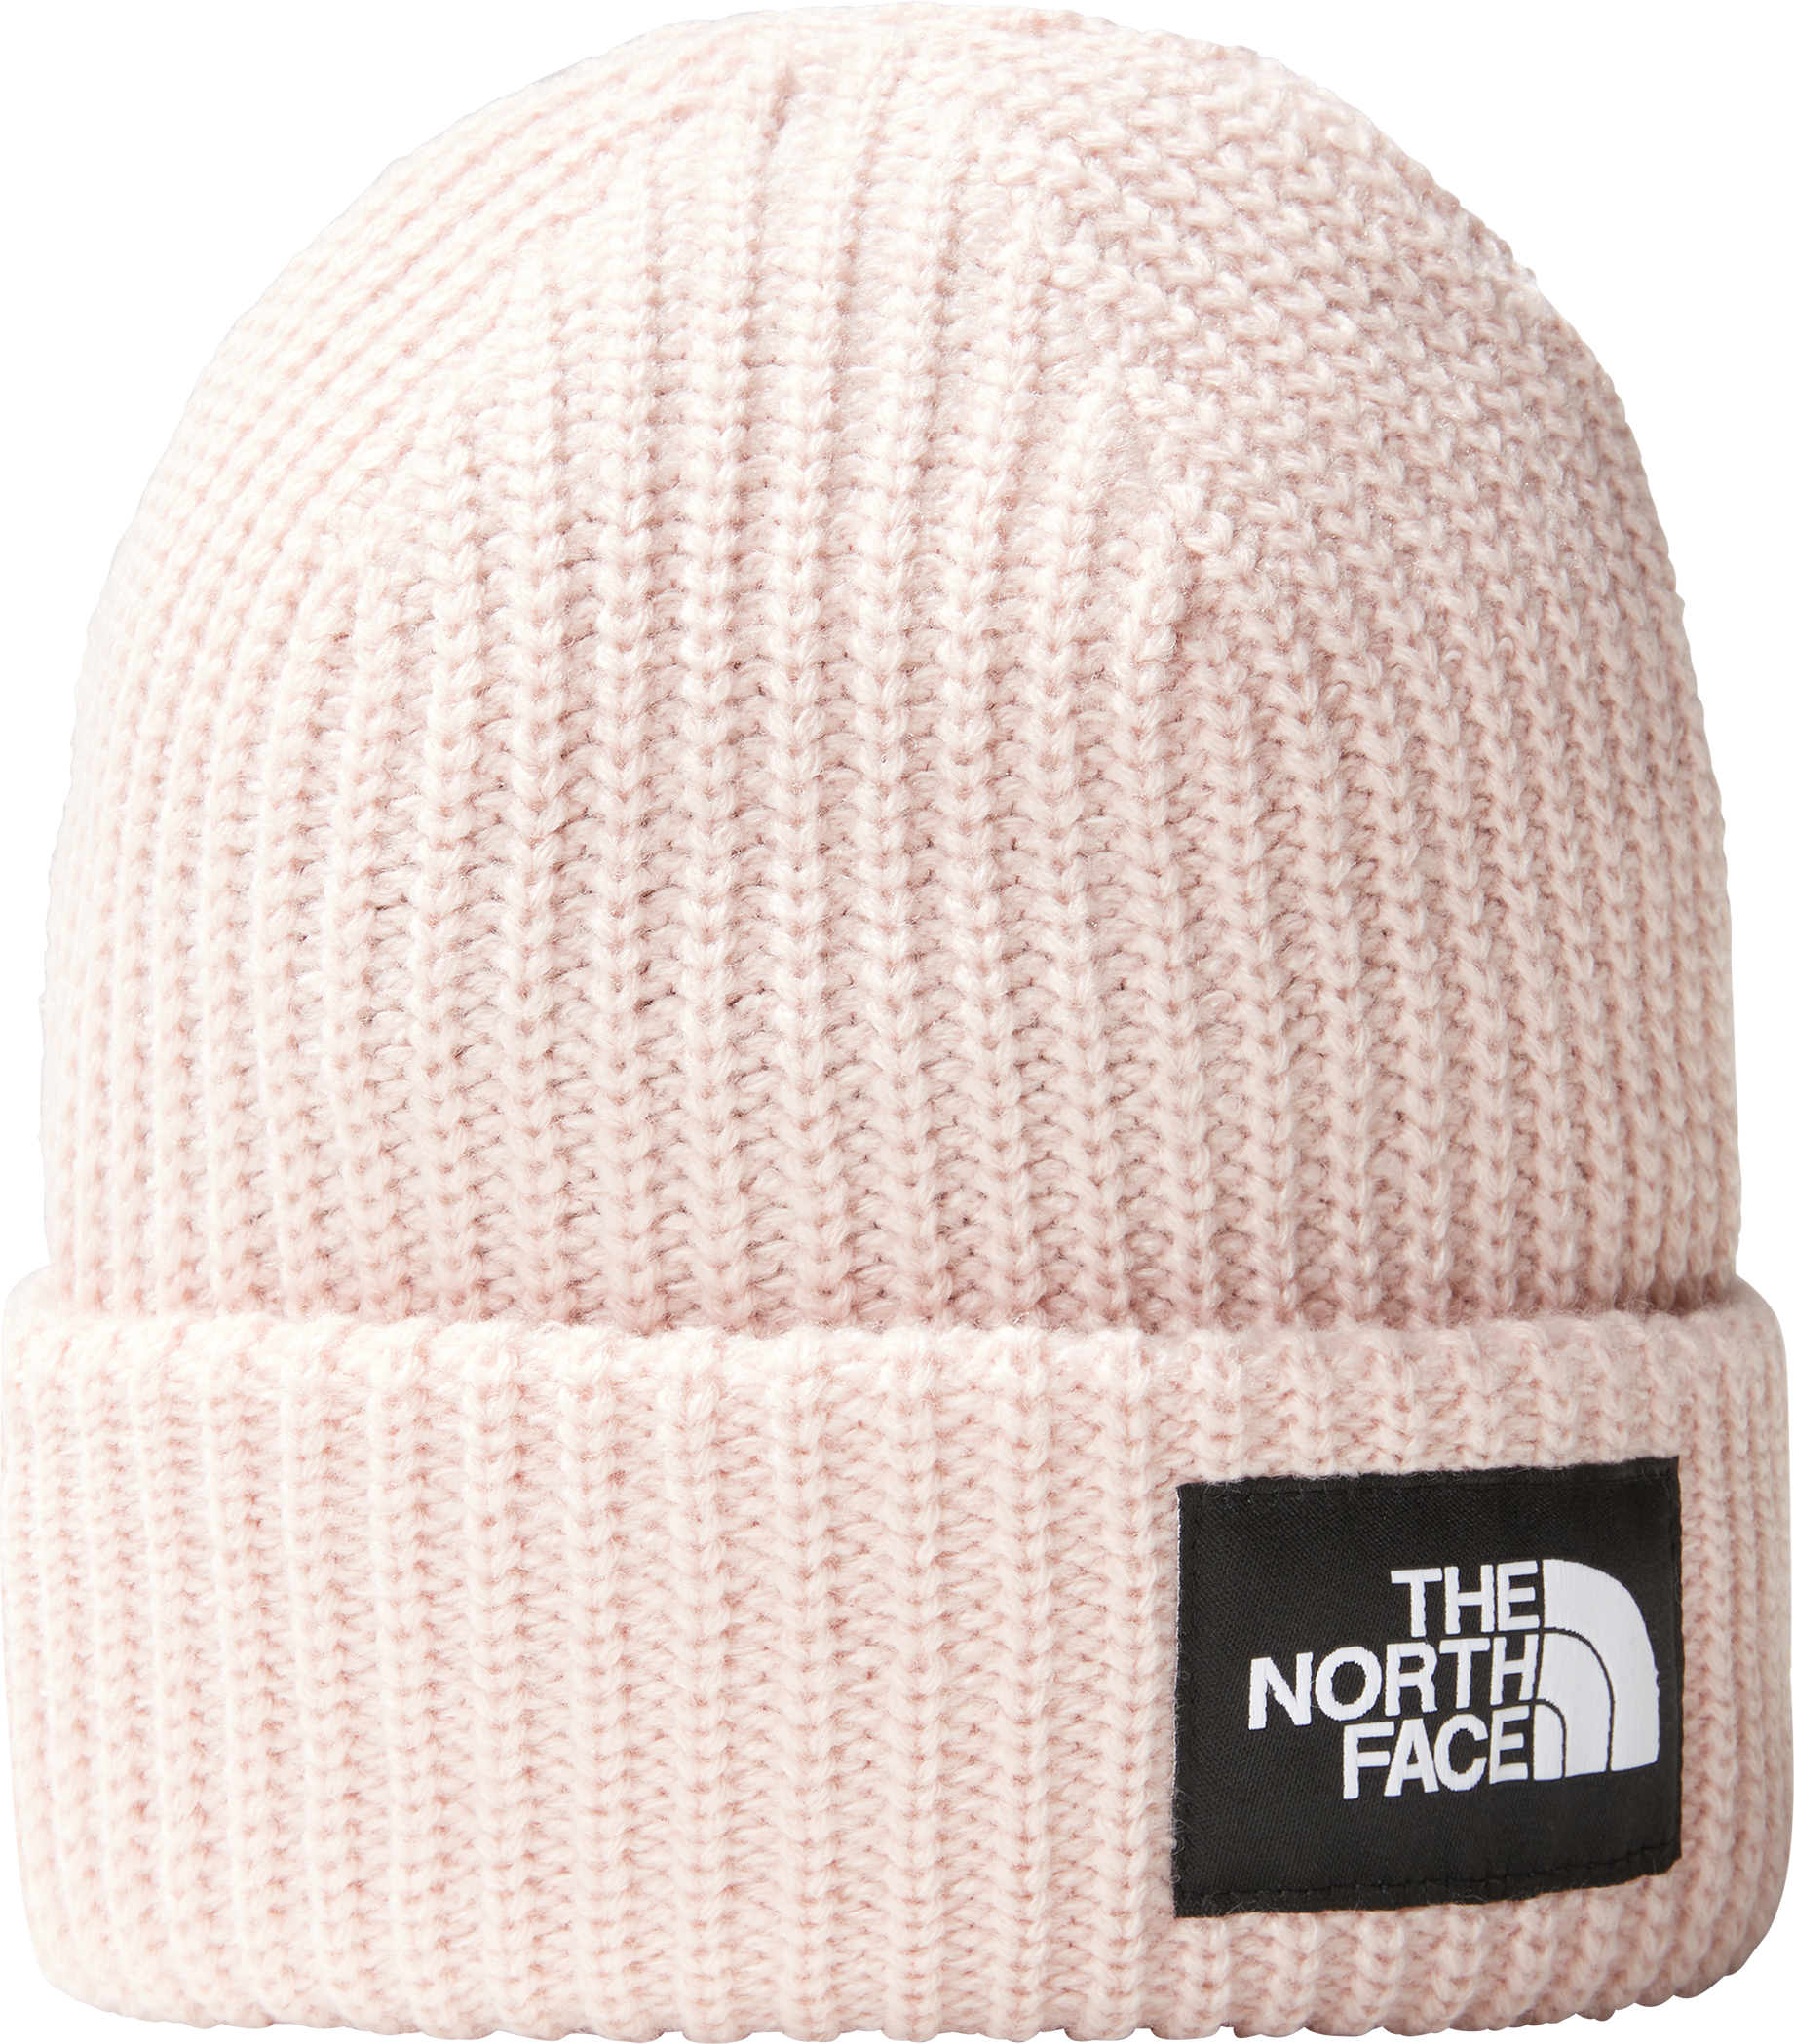 The North Face Kids’ Salty Dog Beanie PINK MOSS